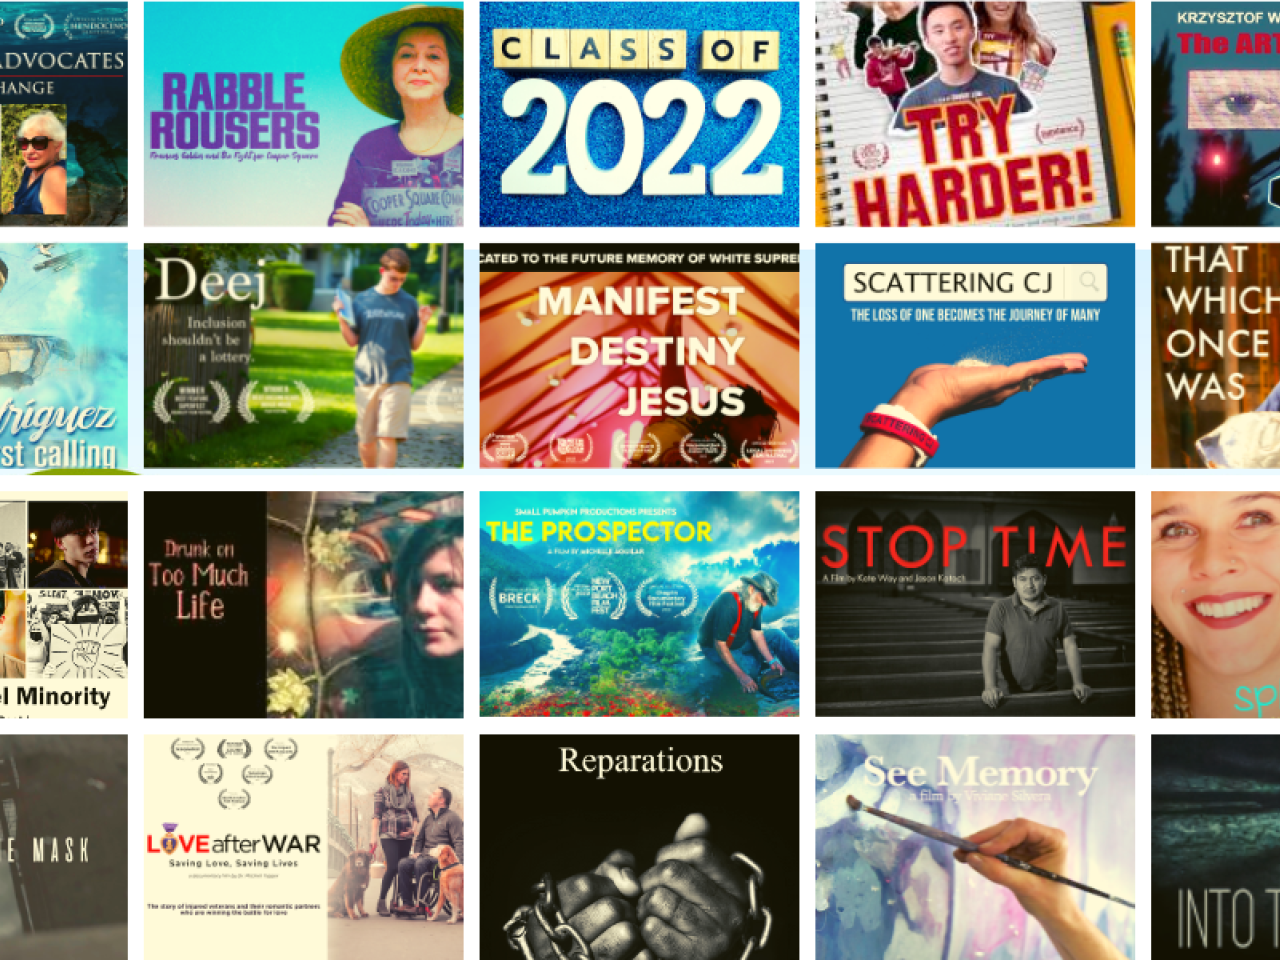 Class of 2022 collage of film posters for New Day Films new releases of 2022